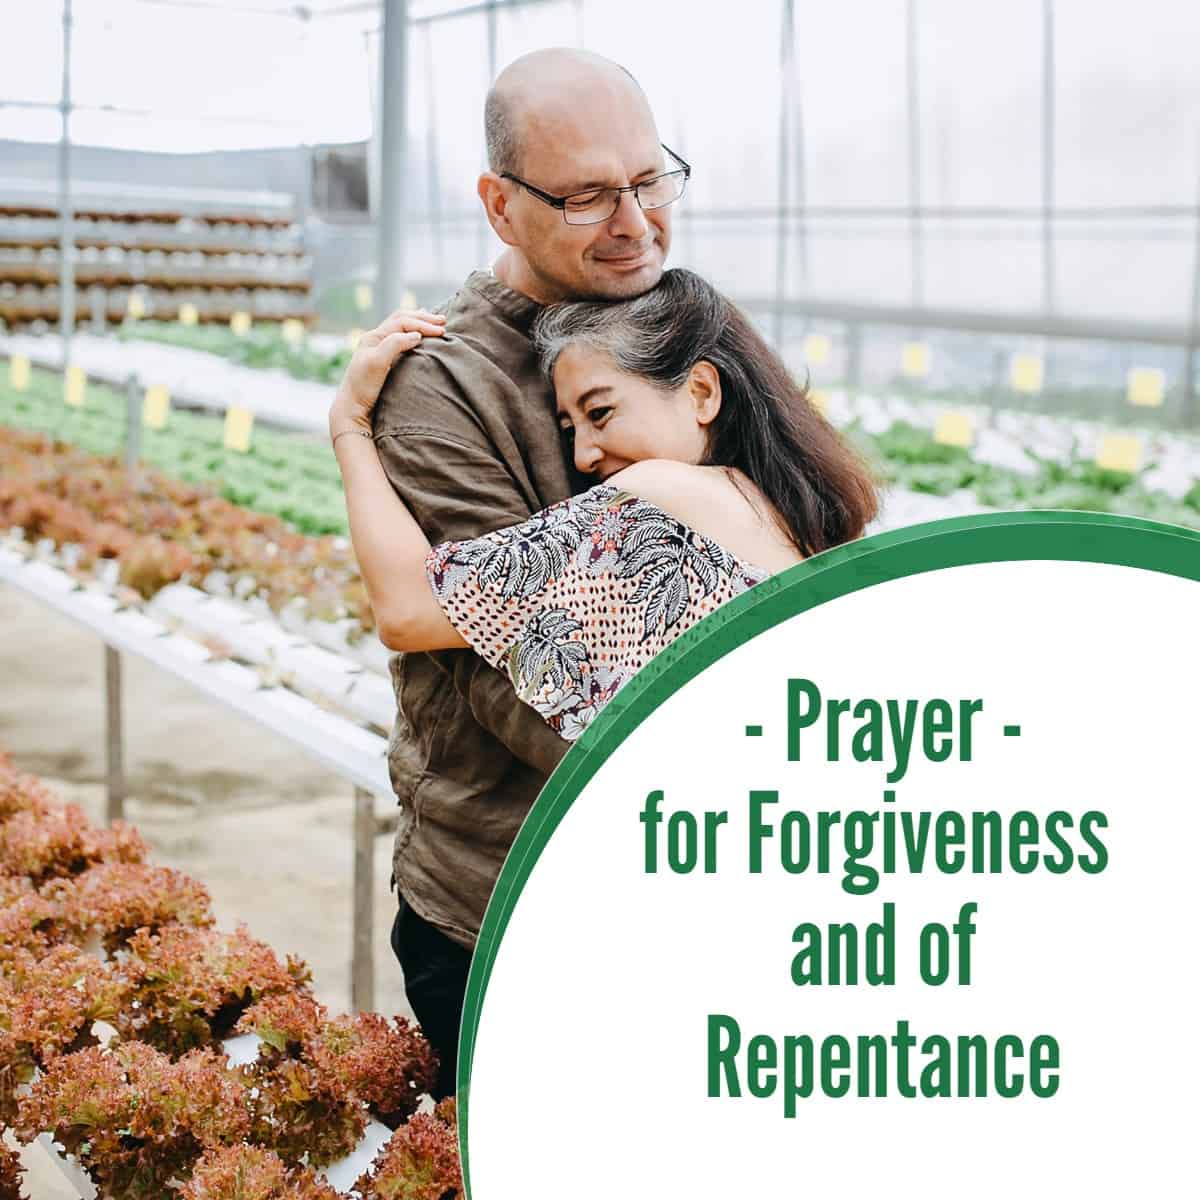 Prayer for Forgiveness and of Repentance